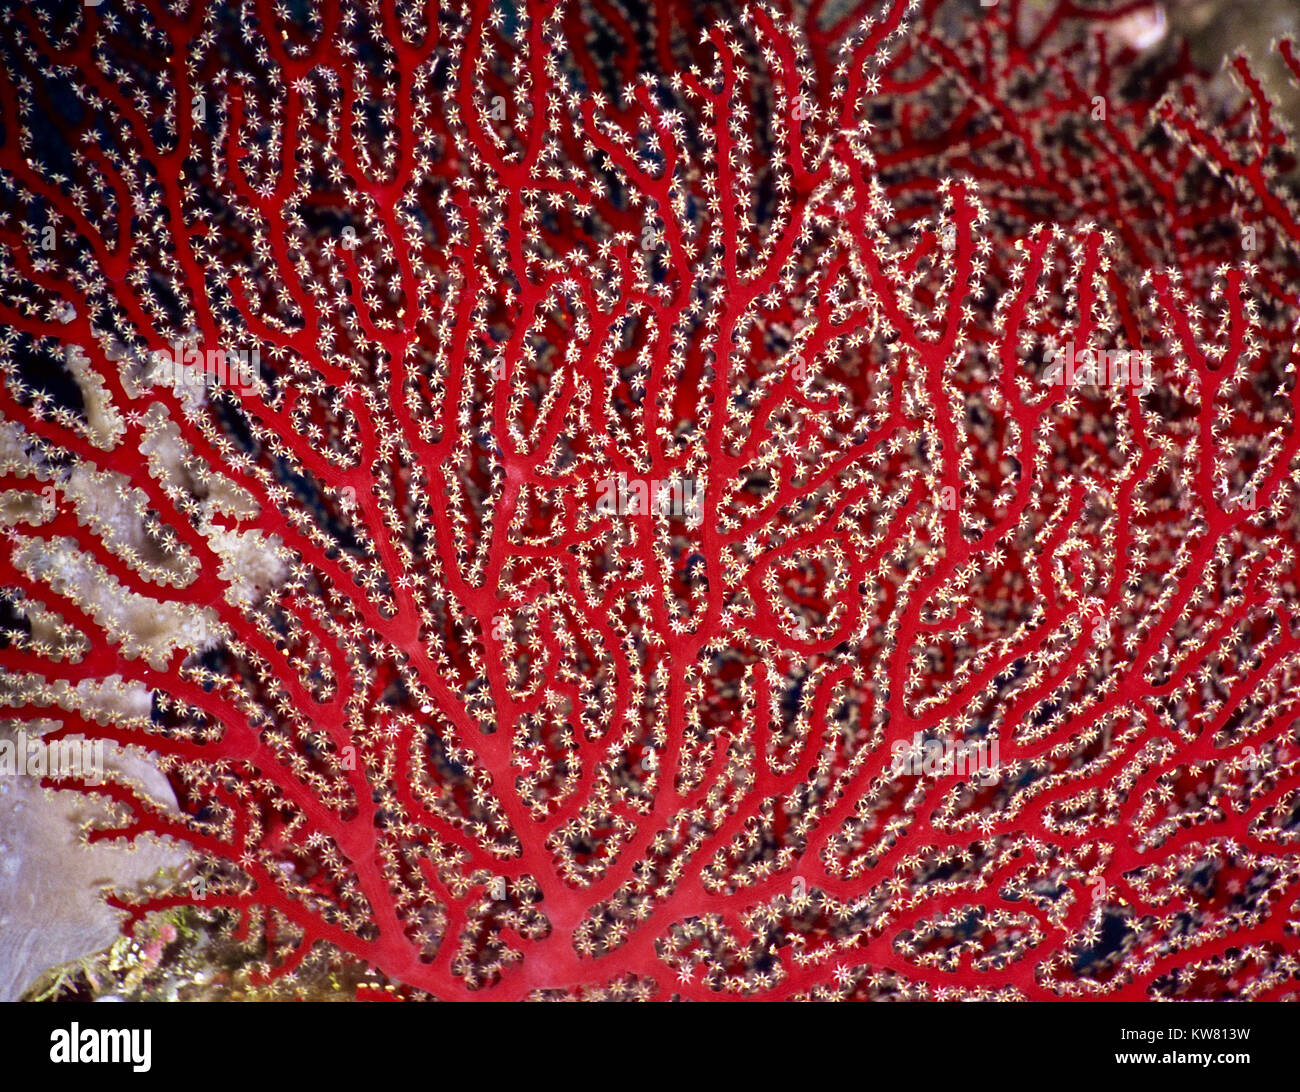 A gorgonian coral (Acabaria splendens) with all its eight tentacle polyps extended and feeding in the current. Photographed in the Egyptian Red Sea. Stock Photo